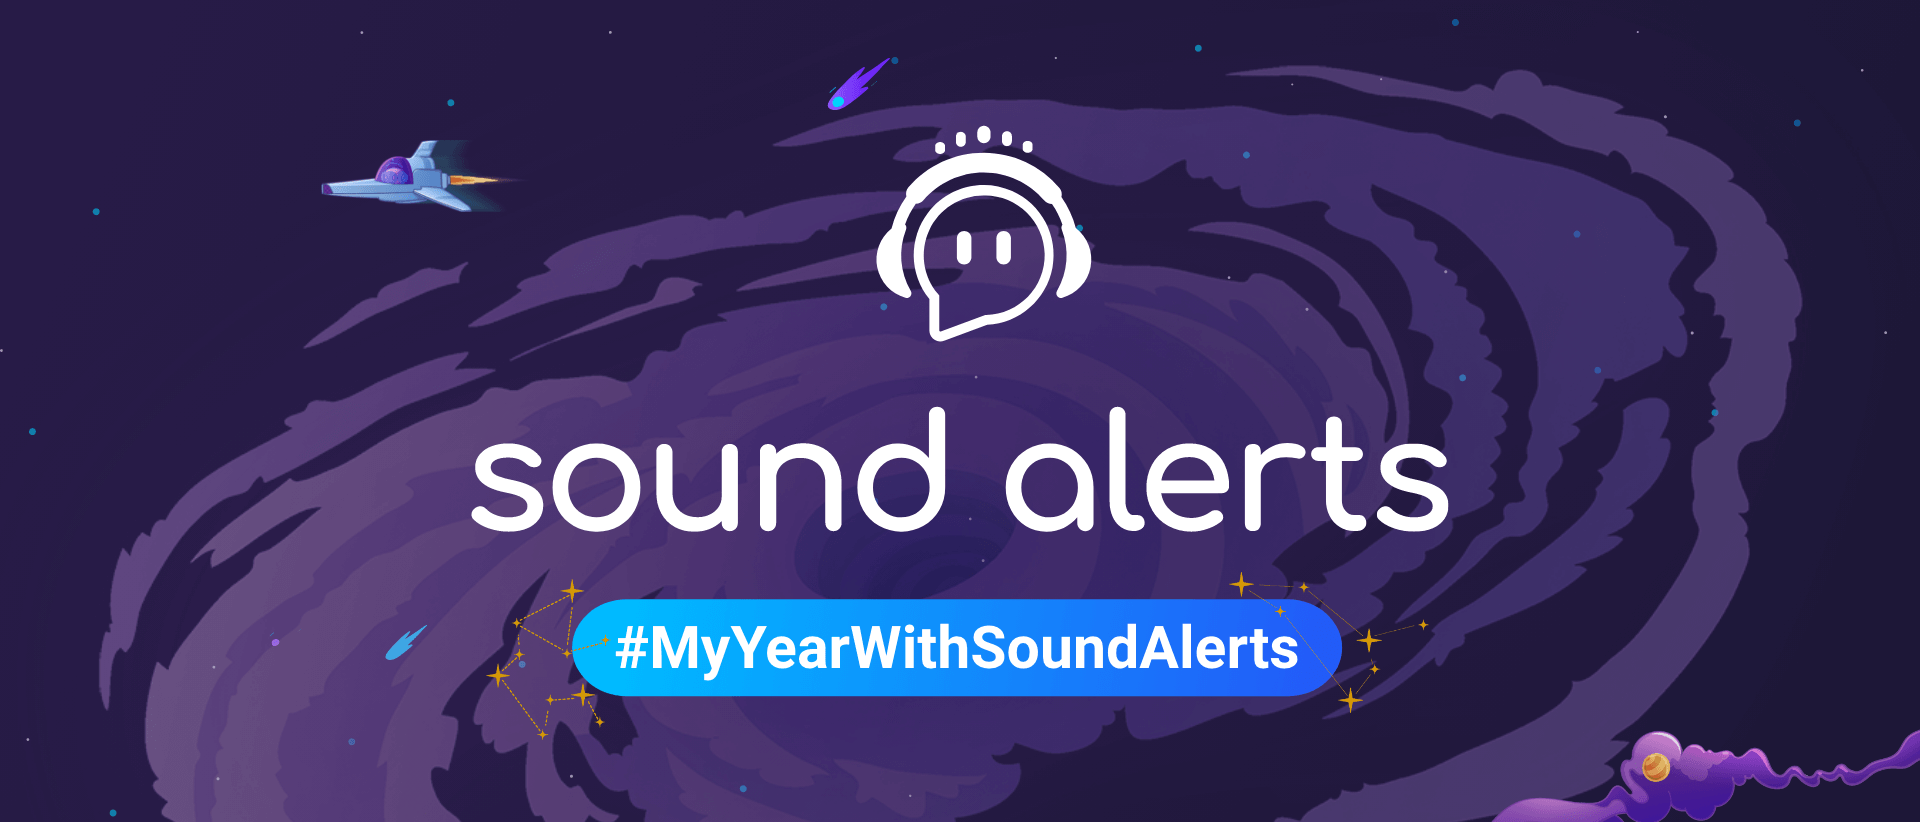 The Sound Alerts year review logo for #MyYearWithSoundAlerts.